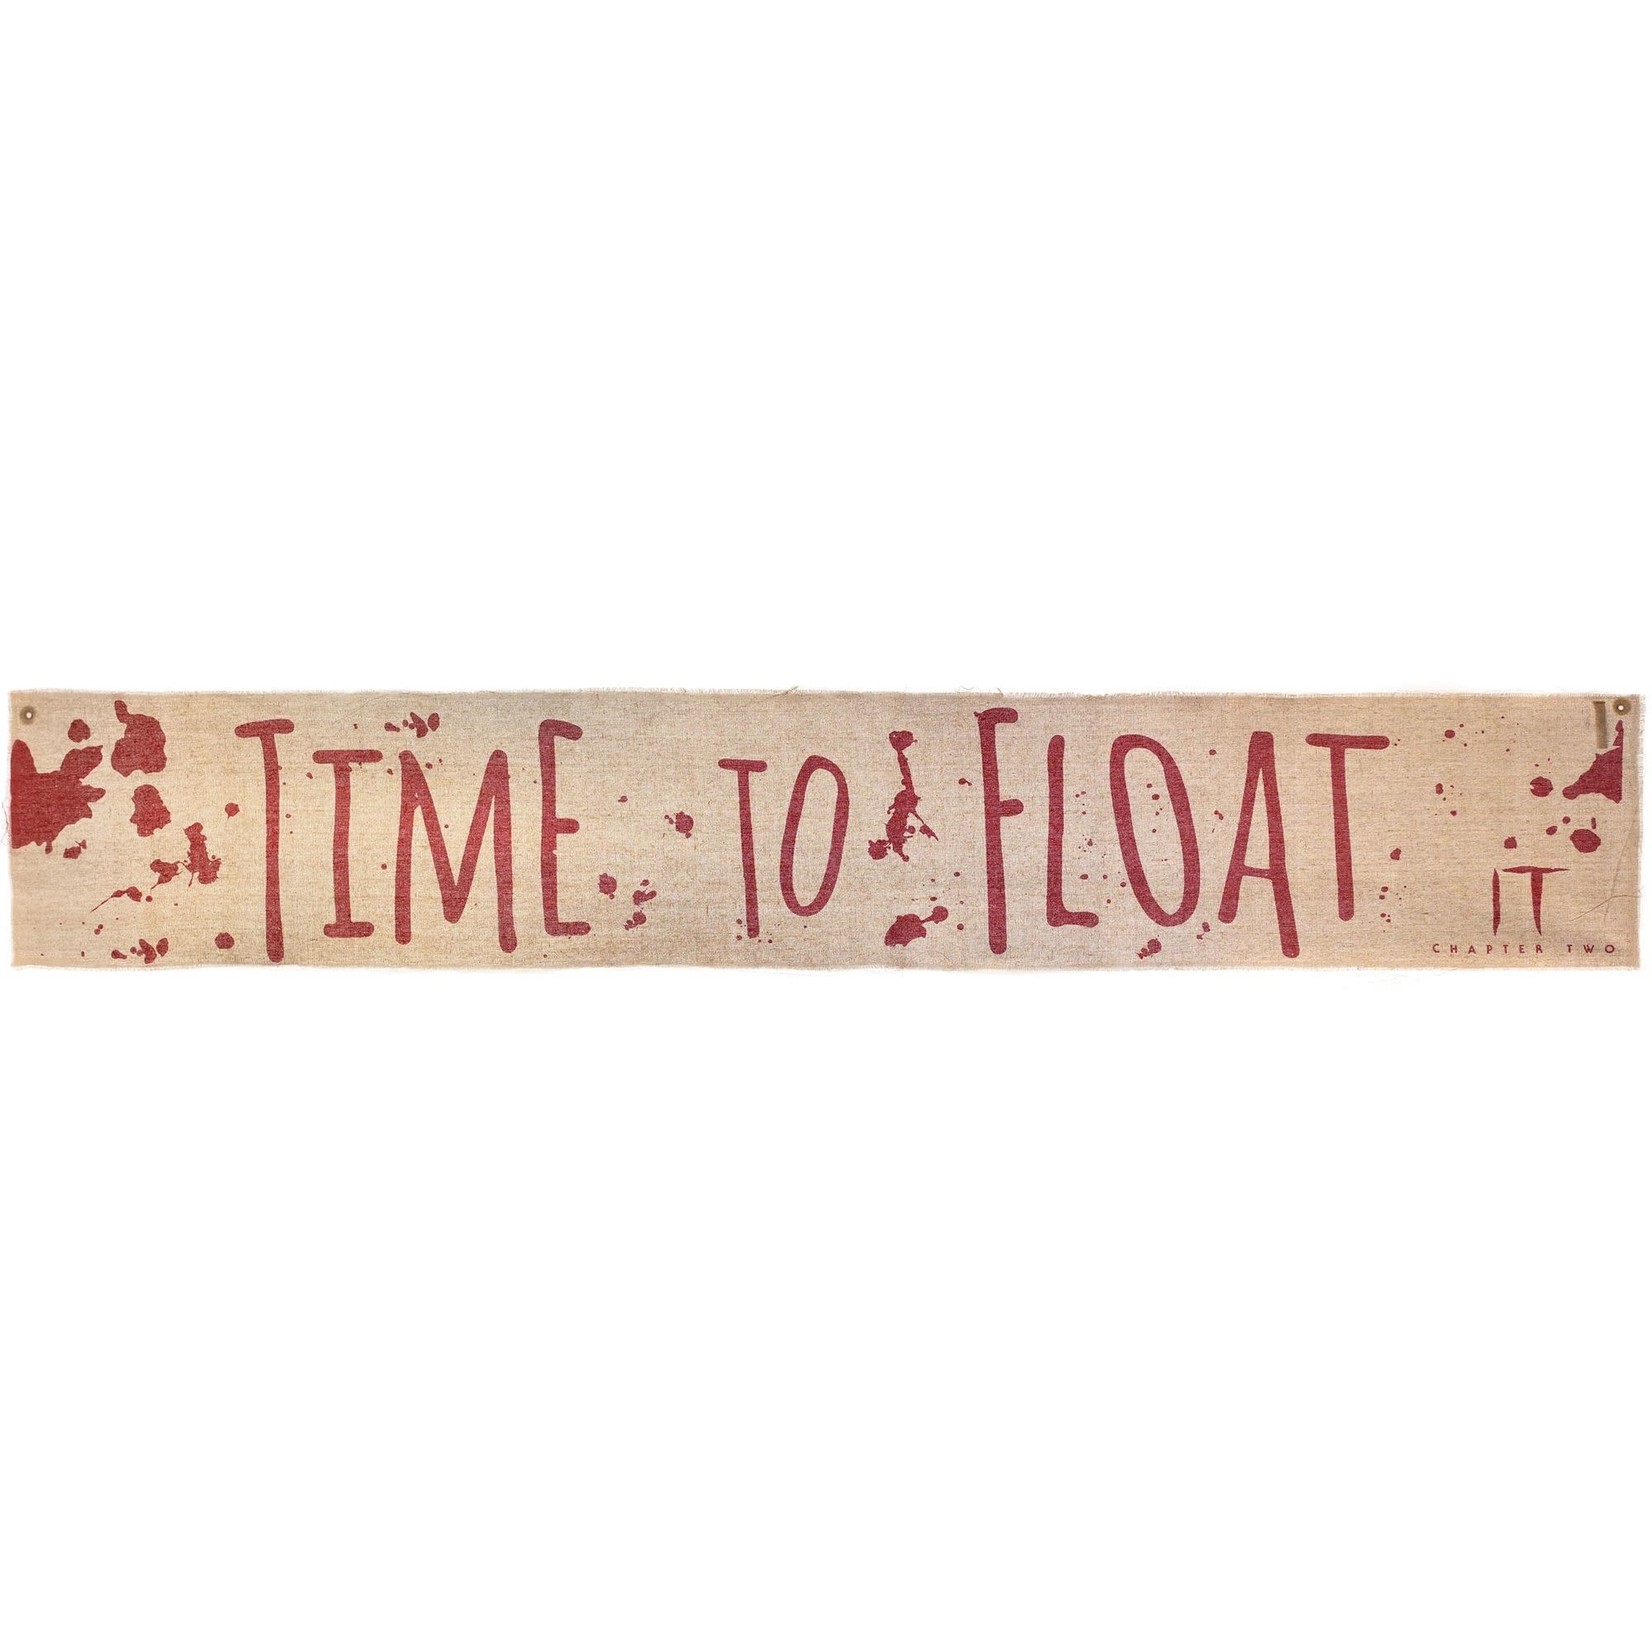 It Chapter Two "Time To Float" Cloth Banner